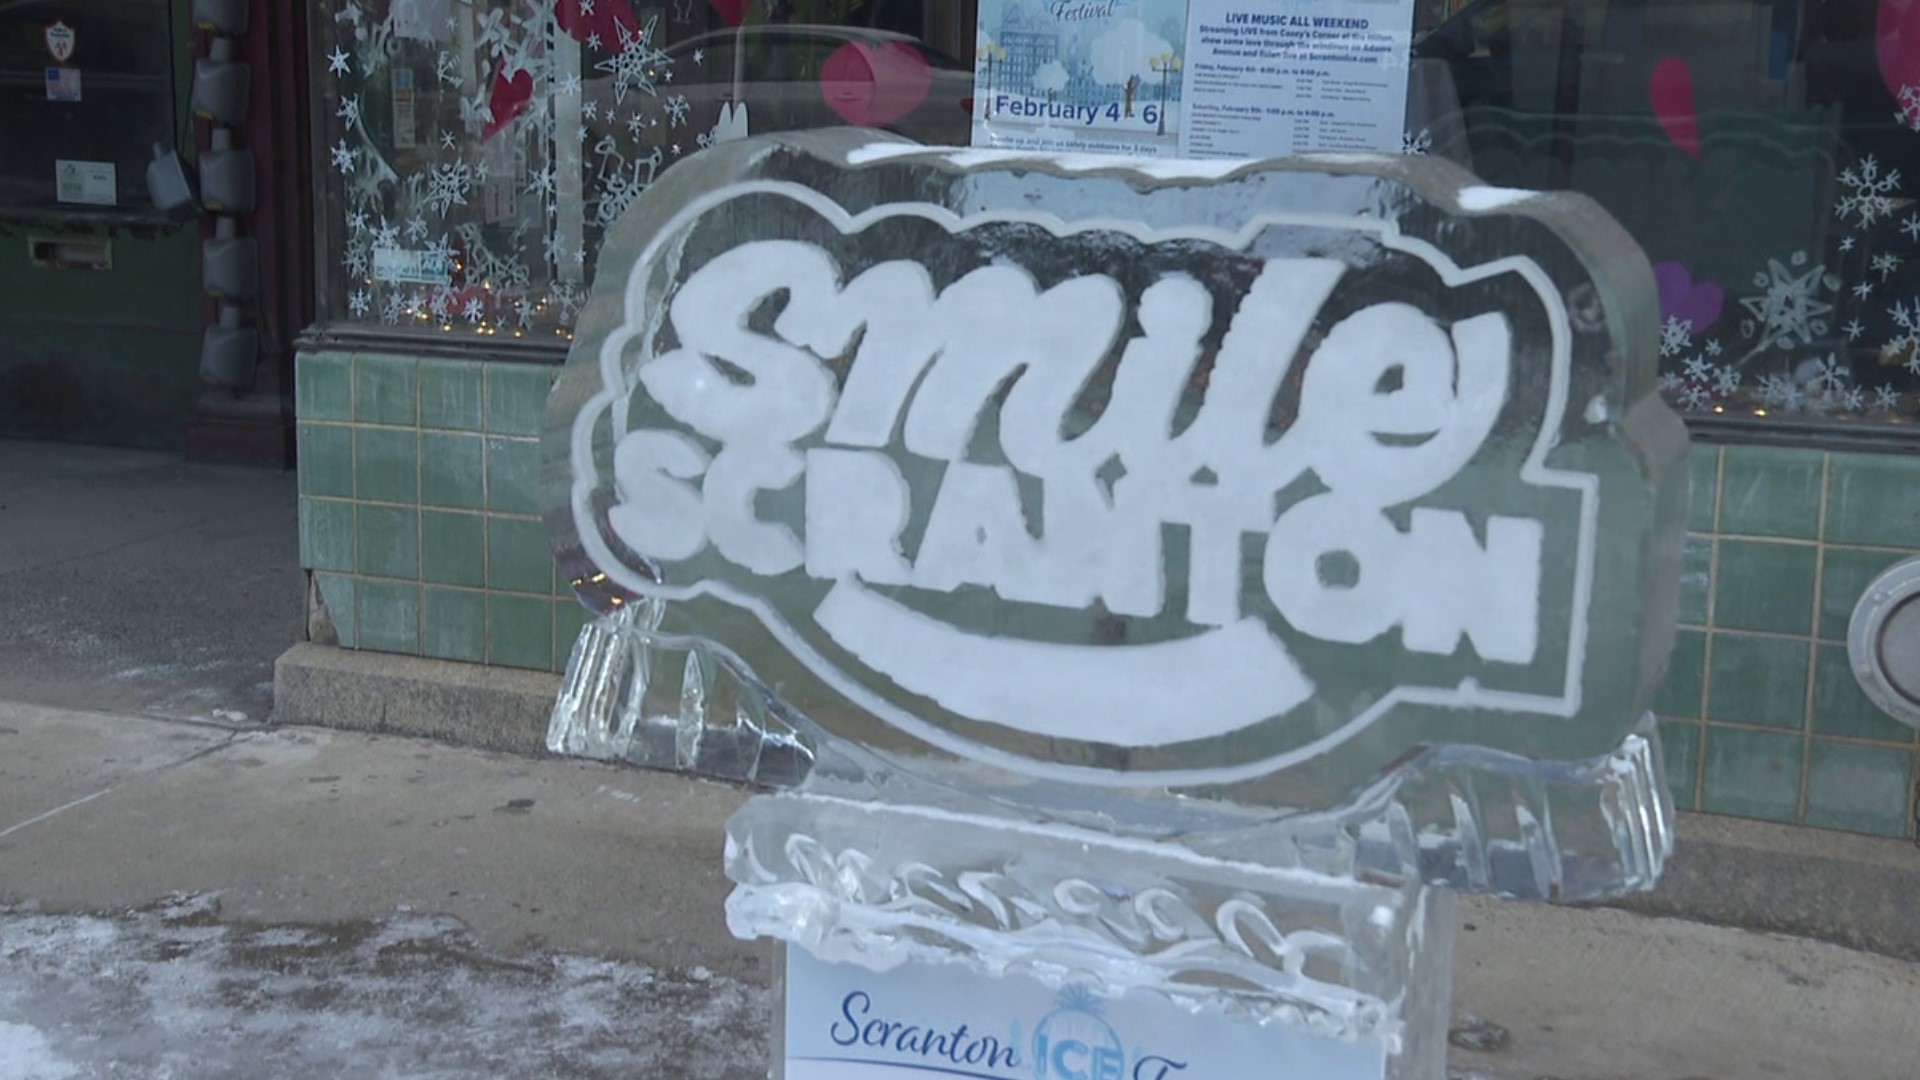 The 2nd Annual Scranton Ice Festival got off to a late start Saturday after Friday's ice storm postponed the opening events.